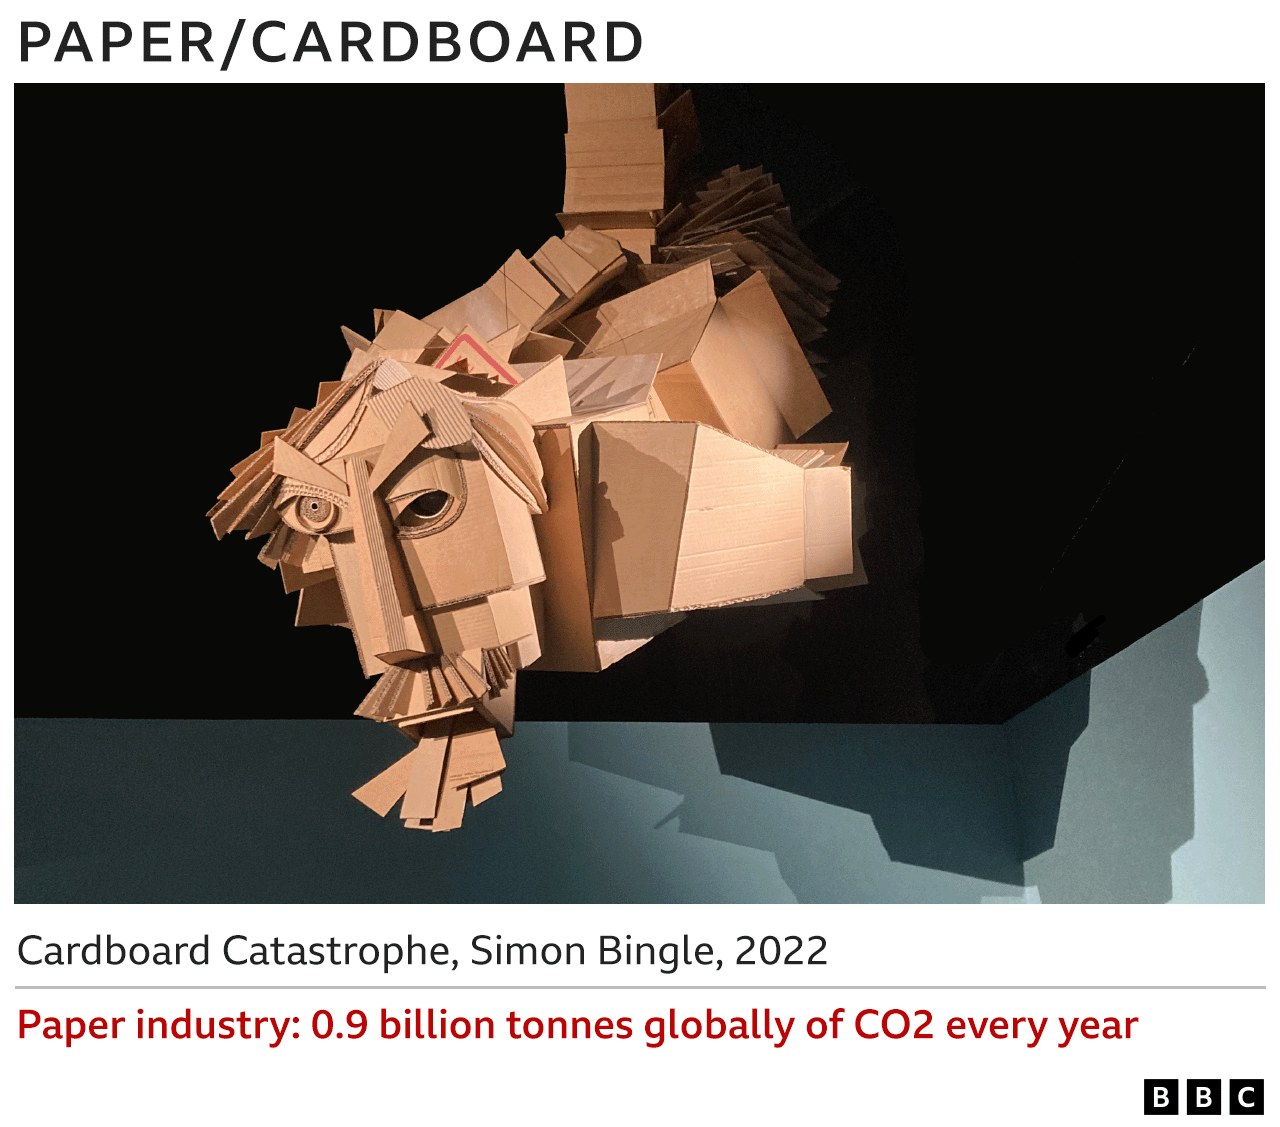 Images of cardboard sculpture - Cardboard Catastrophe, Simon Bingle, 2022 - Paper industry 0.9bn tonnes globally of CO2 every year